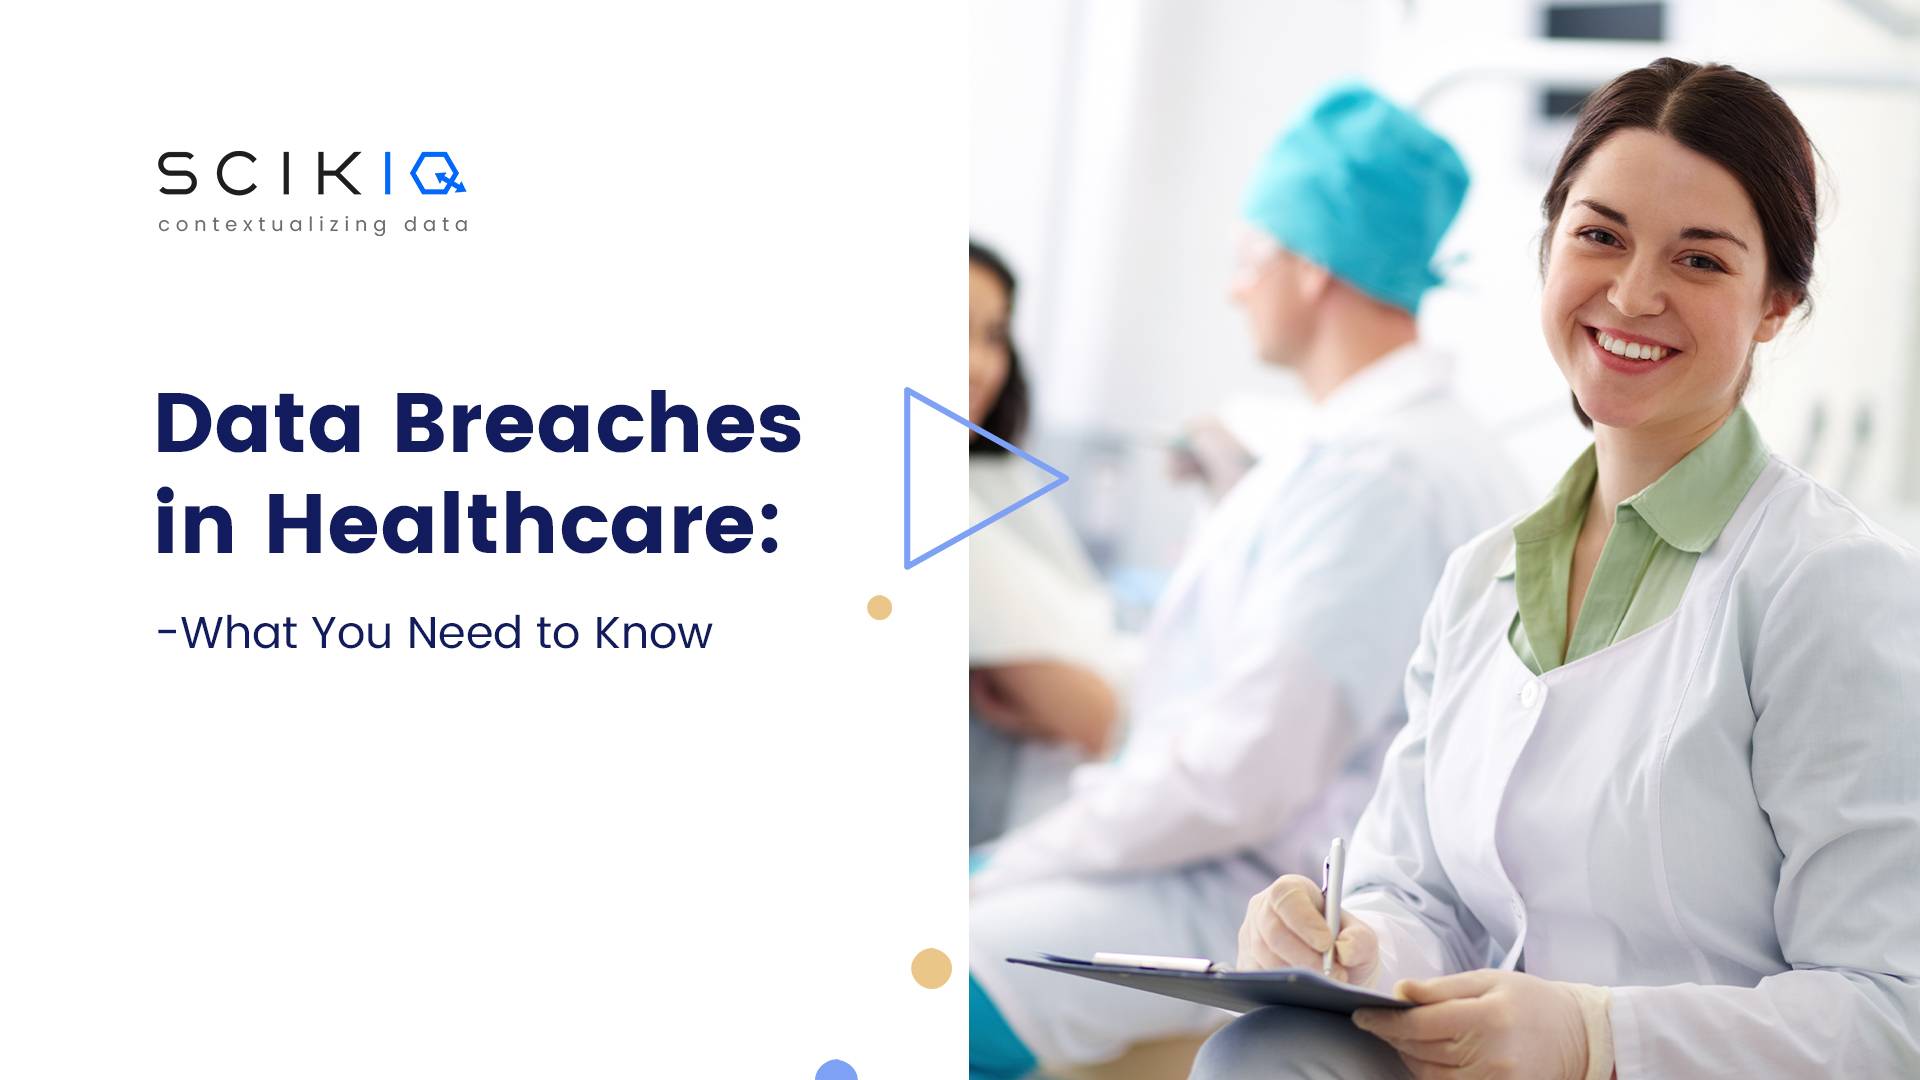 Data Breaches in Healthcare: What You Need to Know